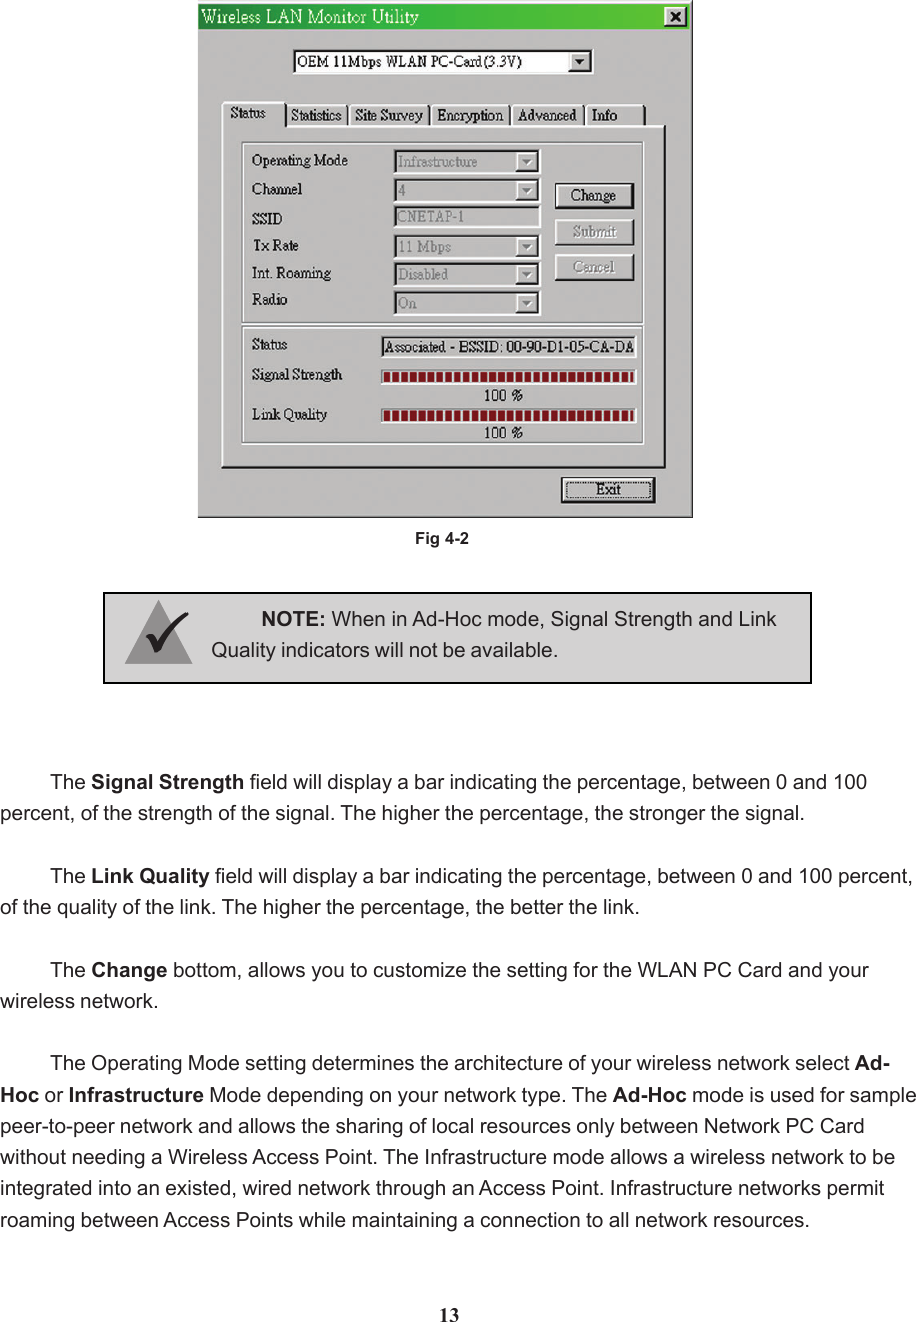 Fig 4-2The Signal Strength field will display a bar indicating the percentage, between 0 and 100percent, of the strength of the signal. The higher the percentage, the stronger the signal.The Link Quality field will display a bar indicating the percentage, between 0 and 100 percent,of the quality of the link. The higher the percentage, the better the link.The Change bottom, allows you to customize the setting for the WLAN PC Card and yourwireless network.The Operating Mode setting determines the architecture of your wireless network select Ad-Hoc or Infrastructure Mode depending on your network type. The Ad-Hoc mode is used for samplepeer-to-peer network and allows the sharing of local resources only between Network PC Cardwithout needing a Wireless Access Point. The Infrastructure mode allows a wireless network to beintegrated into an existed, wired network through an Access Point. Infrastructure networks permitroaming between Access Points while maintaining a connection to all network resources.NOTE: When in Ad-Hoc mode, Signal Strength and LinkQuality indicators will not be available.3333313